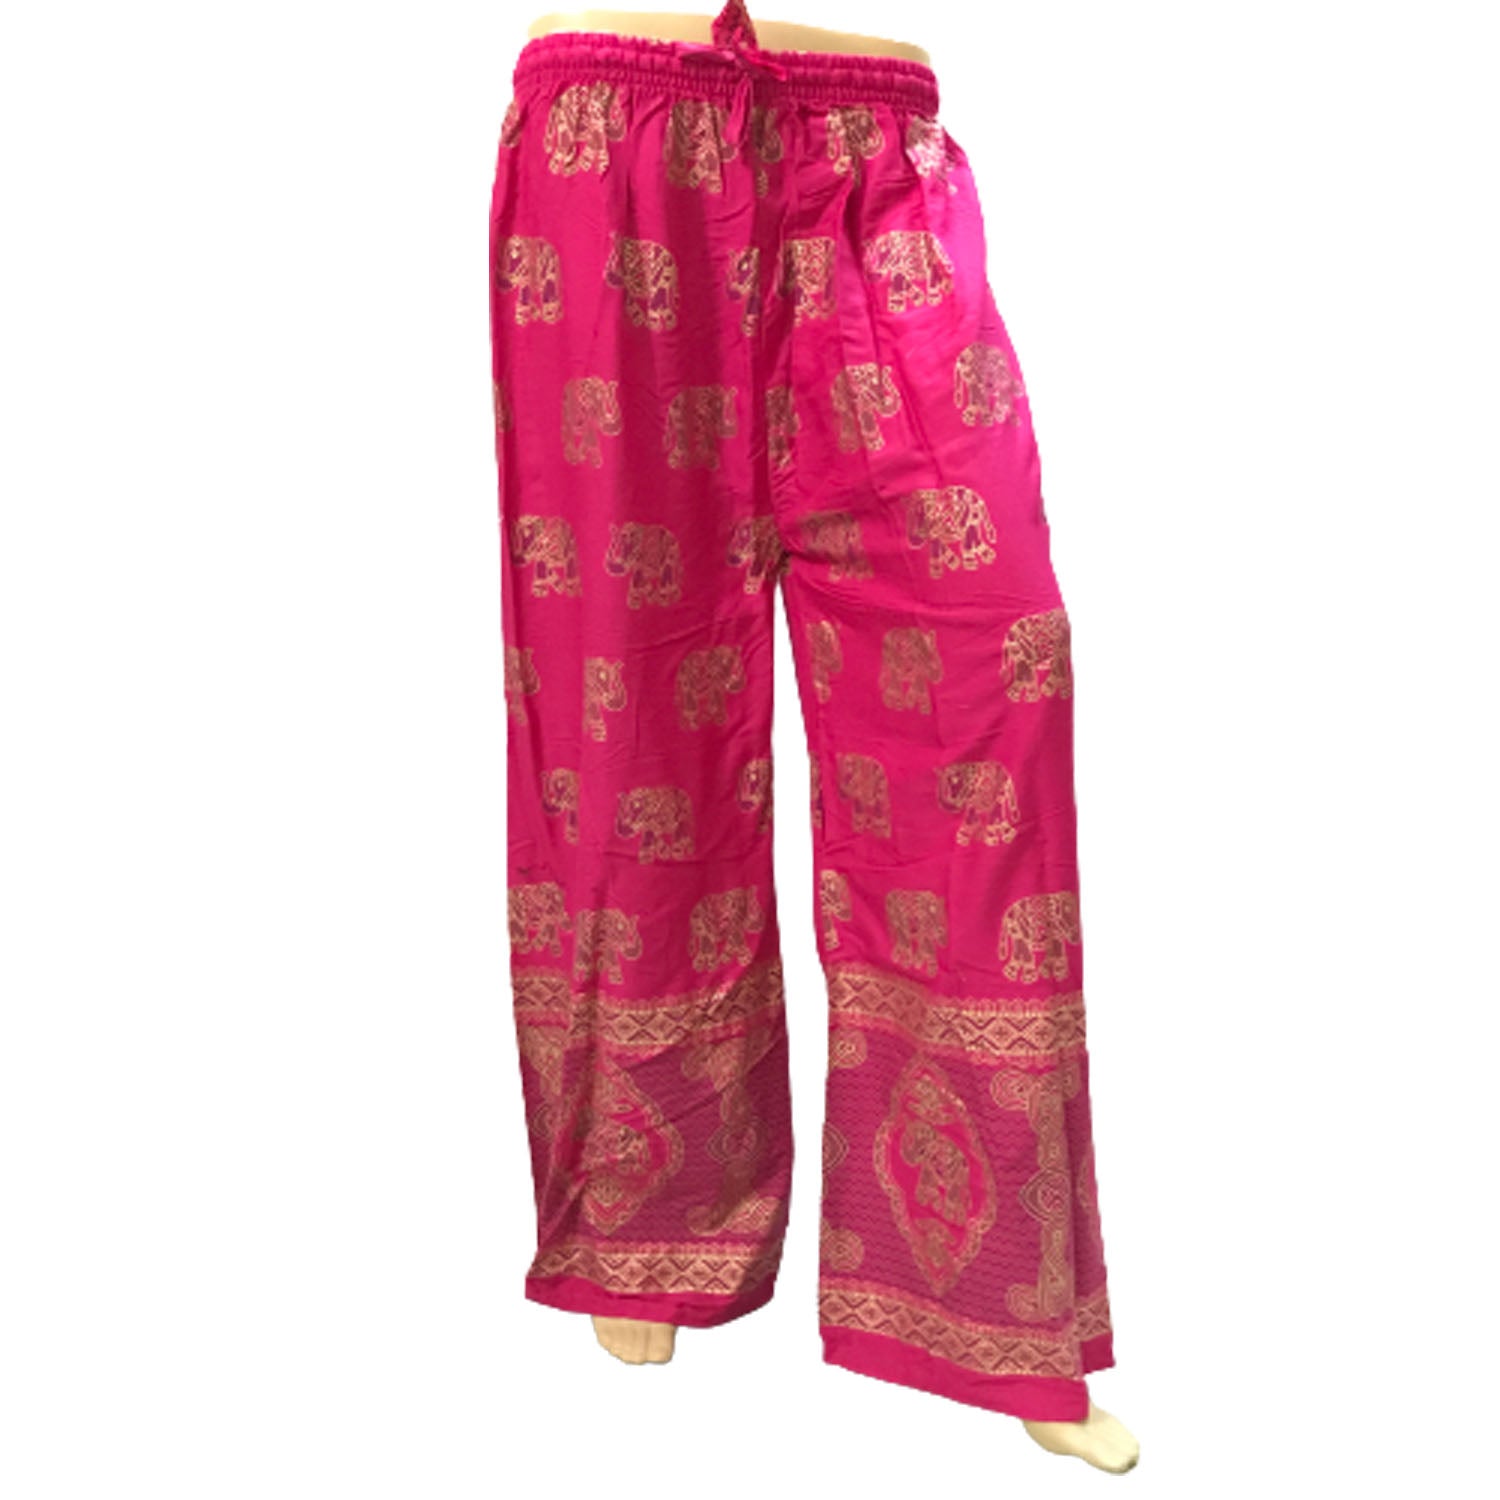 Ganesha Handicrafts Indian Style Elephant Print Solid Colour Loose Trousers, Trousers, loose Trousers, Colour Trousers, Print Trousers, Elephant Print Trousers, Indian Style Trousers, Indian Style Print Trousers, Pink Trousers